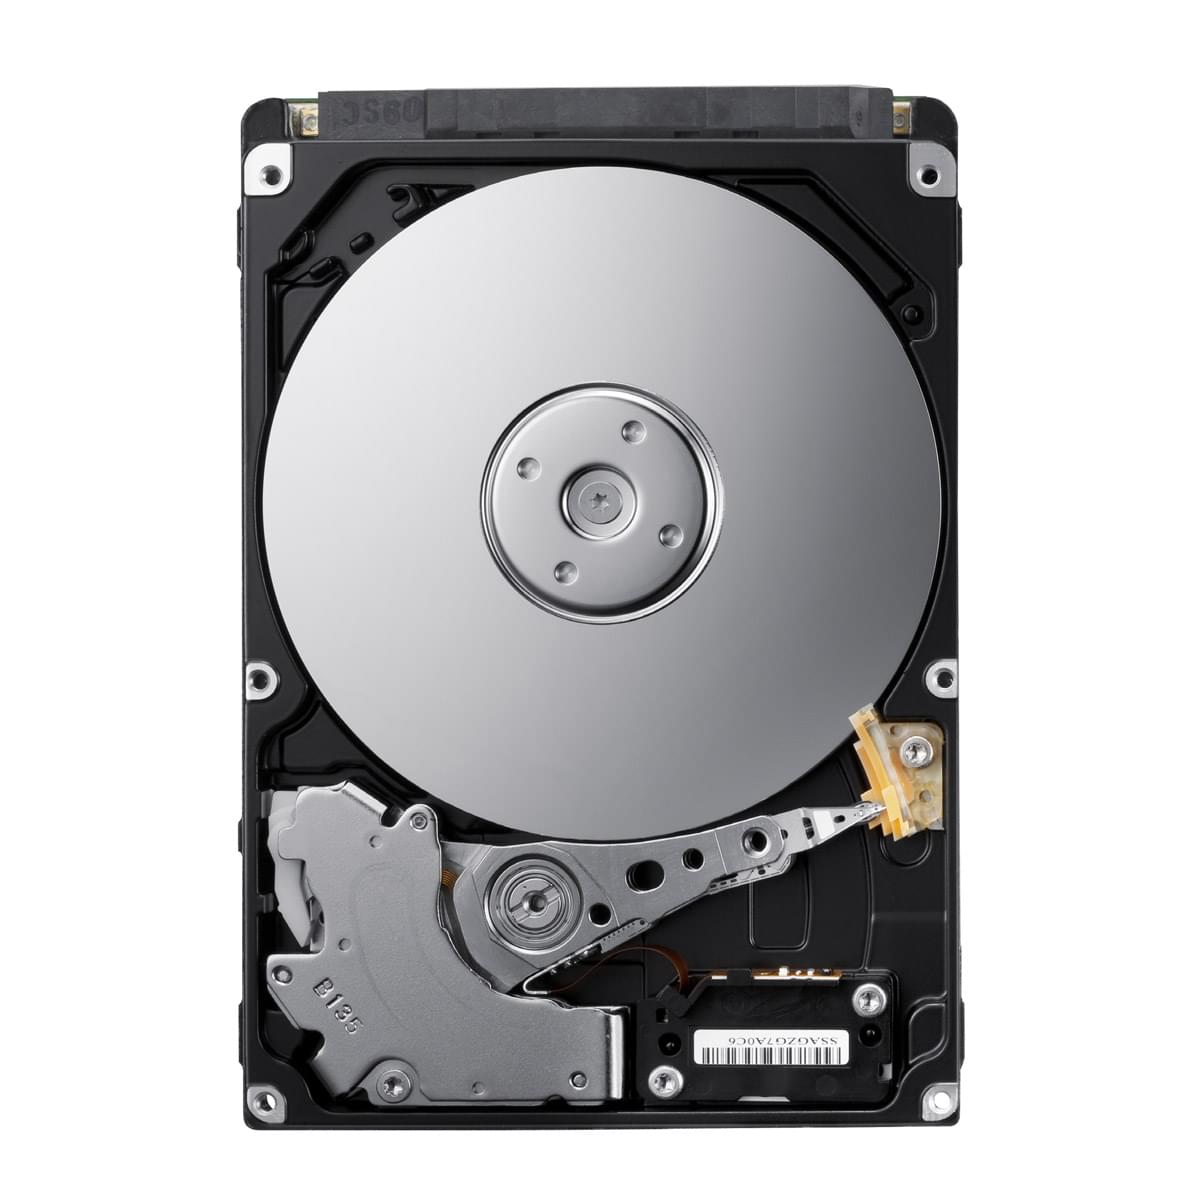 Seagate 1To 5400Tr Serial SATAII 8MO ST1000LM024 - Disque dur 2.5" interne - 0